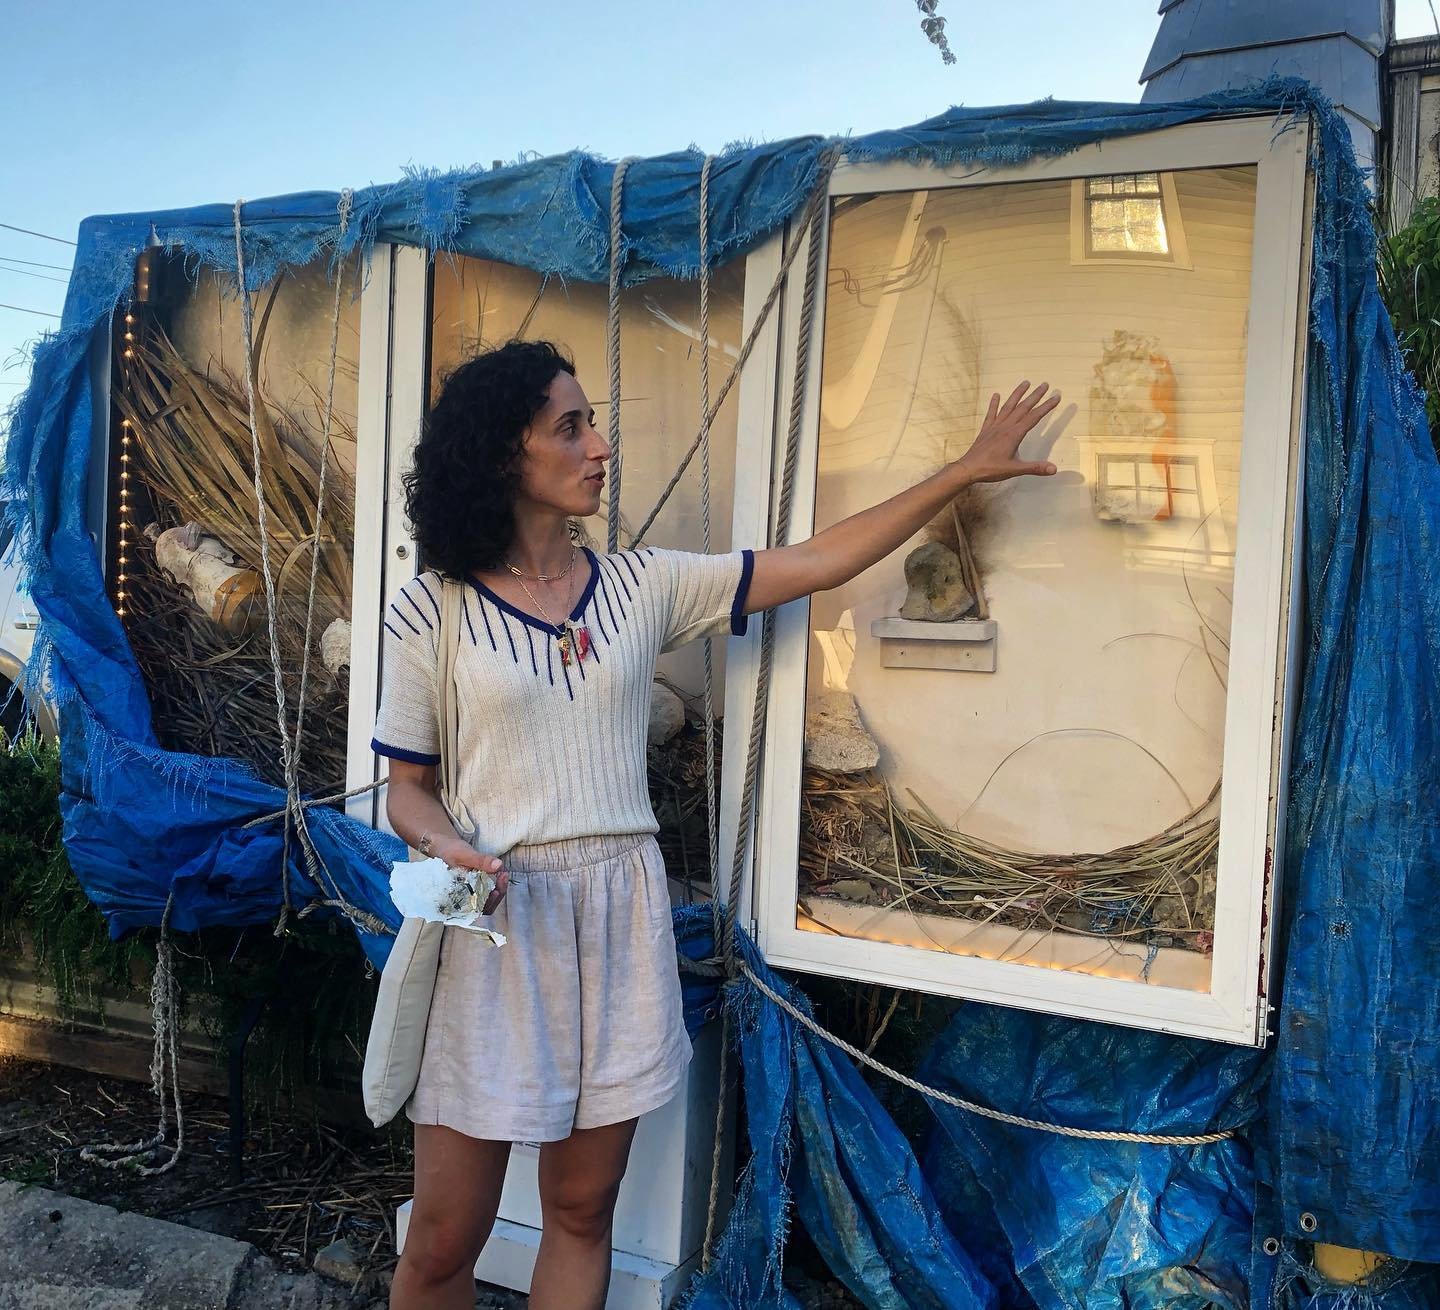 Thank you for a beautiful evening at Rebecca Braziel&rsquo;s Artist Talk &amp; Walk in celebration of her installation, &ldquo;Acquisition,&rdquo; at the Drive Thru Art Box at Green Truck Pub. 

&ldquo;Acquisition&rdquo; is on display thru June 18th 